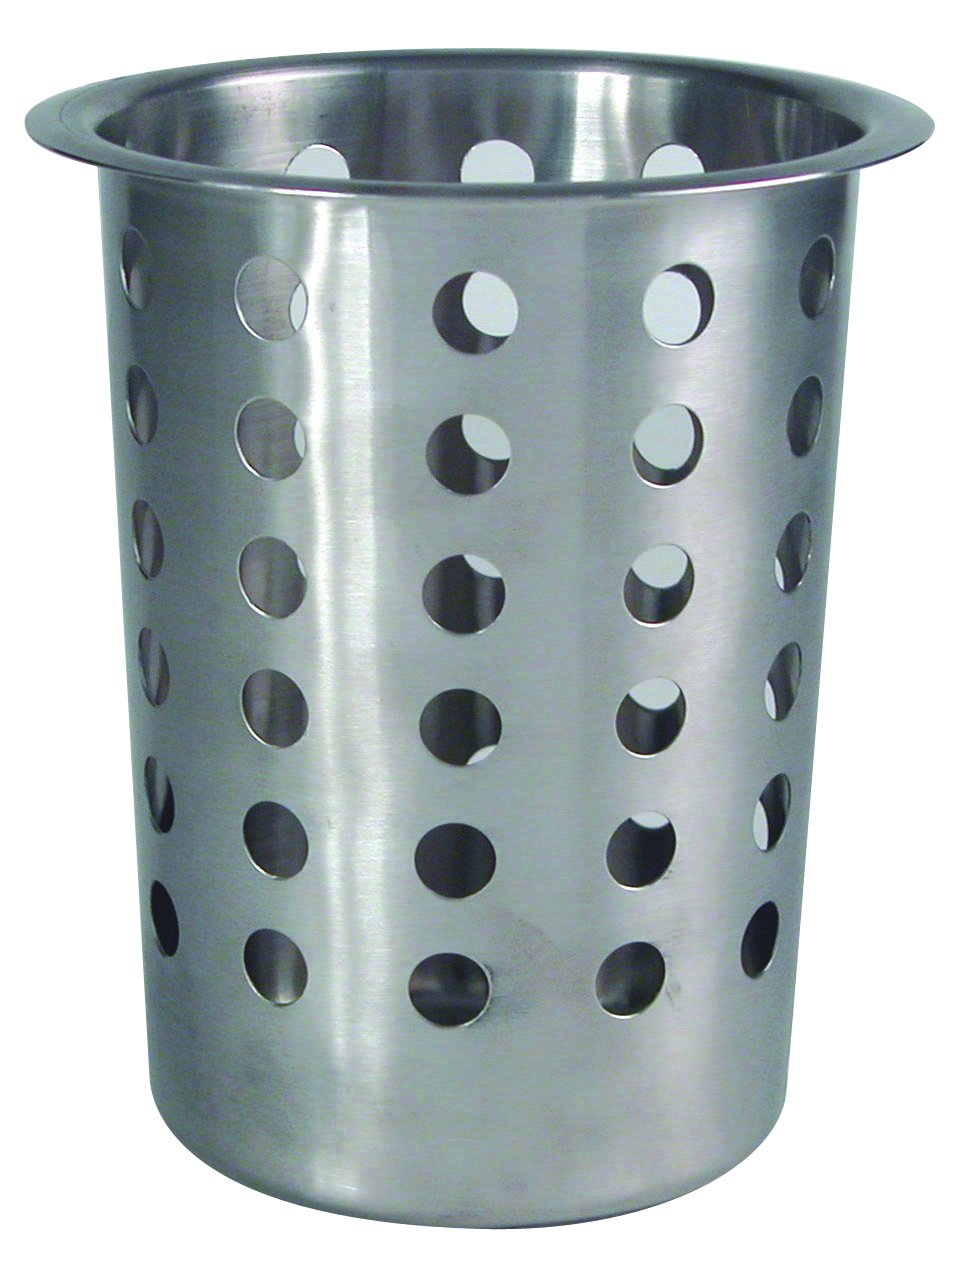 GenWare Stainless Steel Perforated Cutlery Cylinder